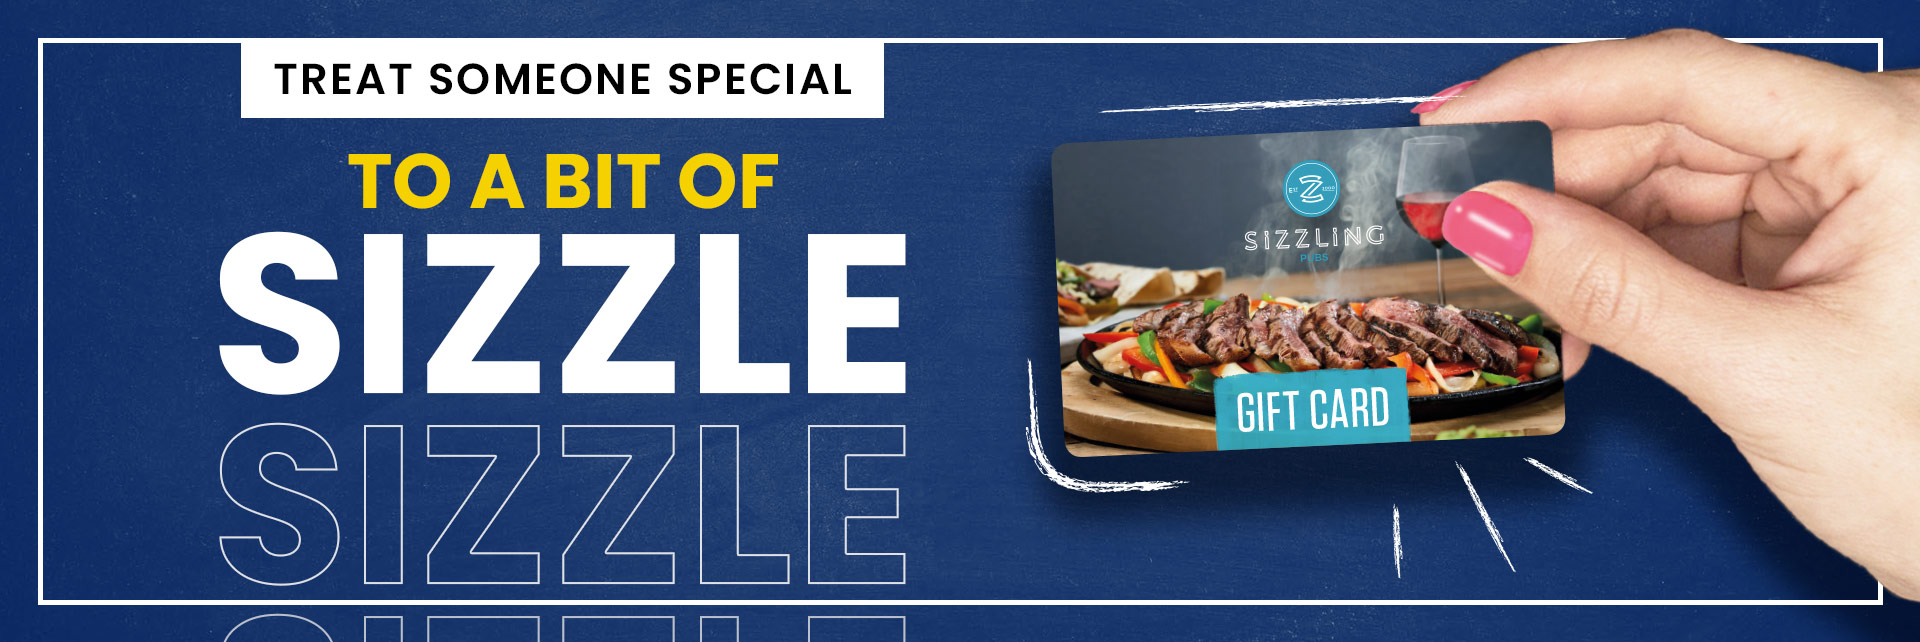 Sizzling Pubs Gift Card at The White Horse in Darlington